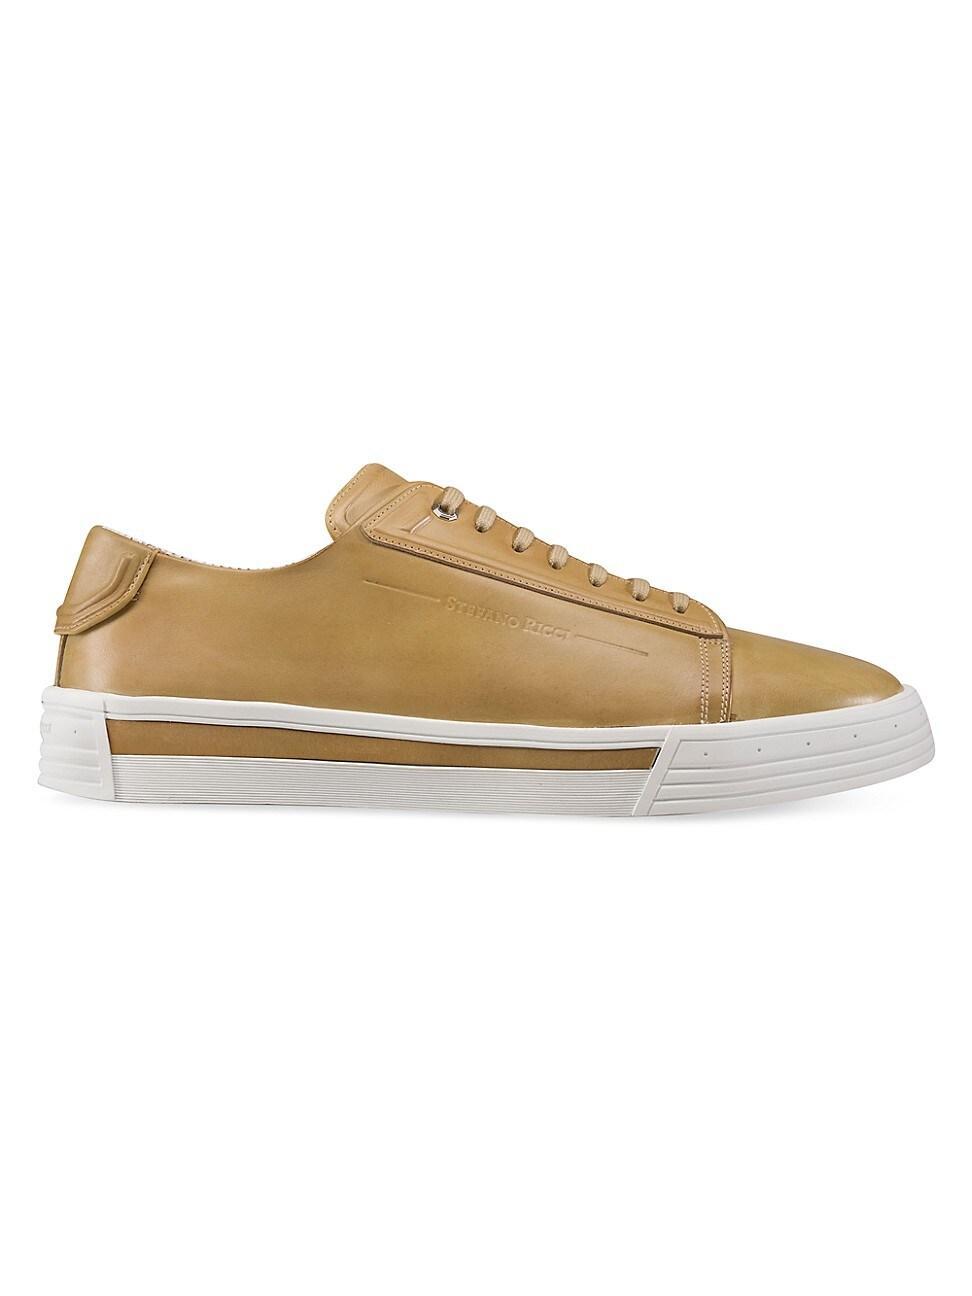 Mens Calfskin Leather Sneakers Product Image